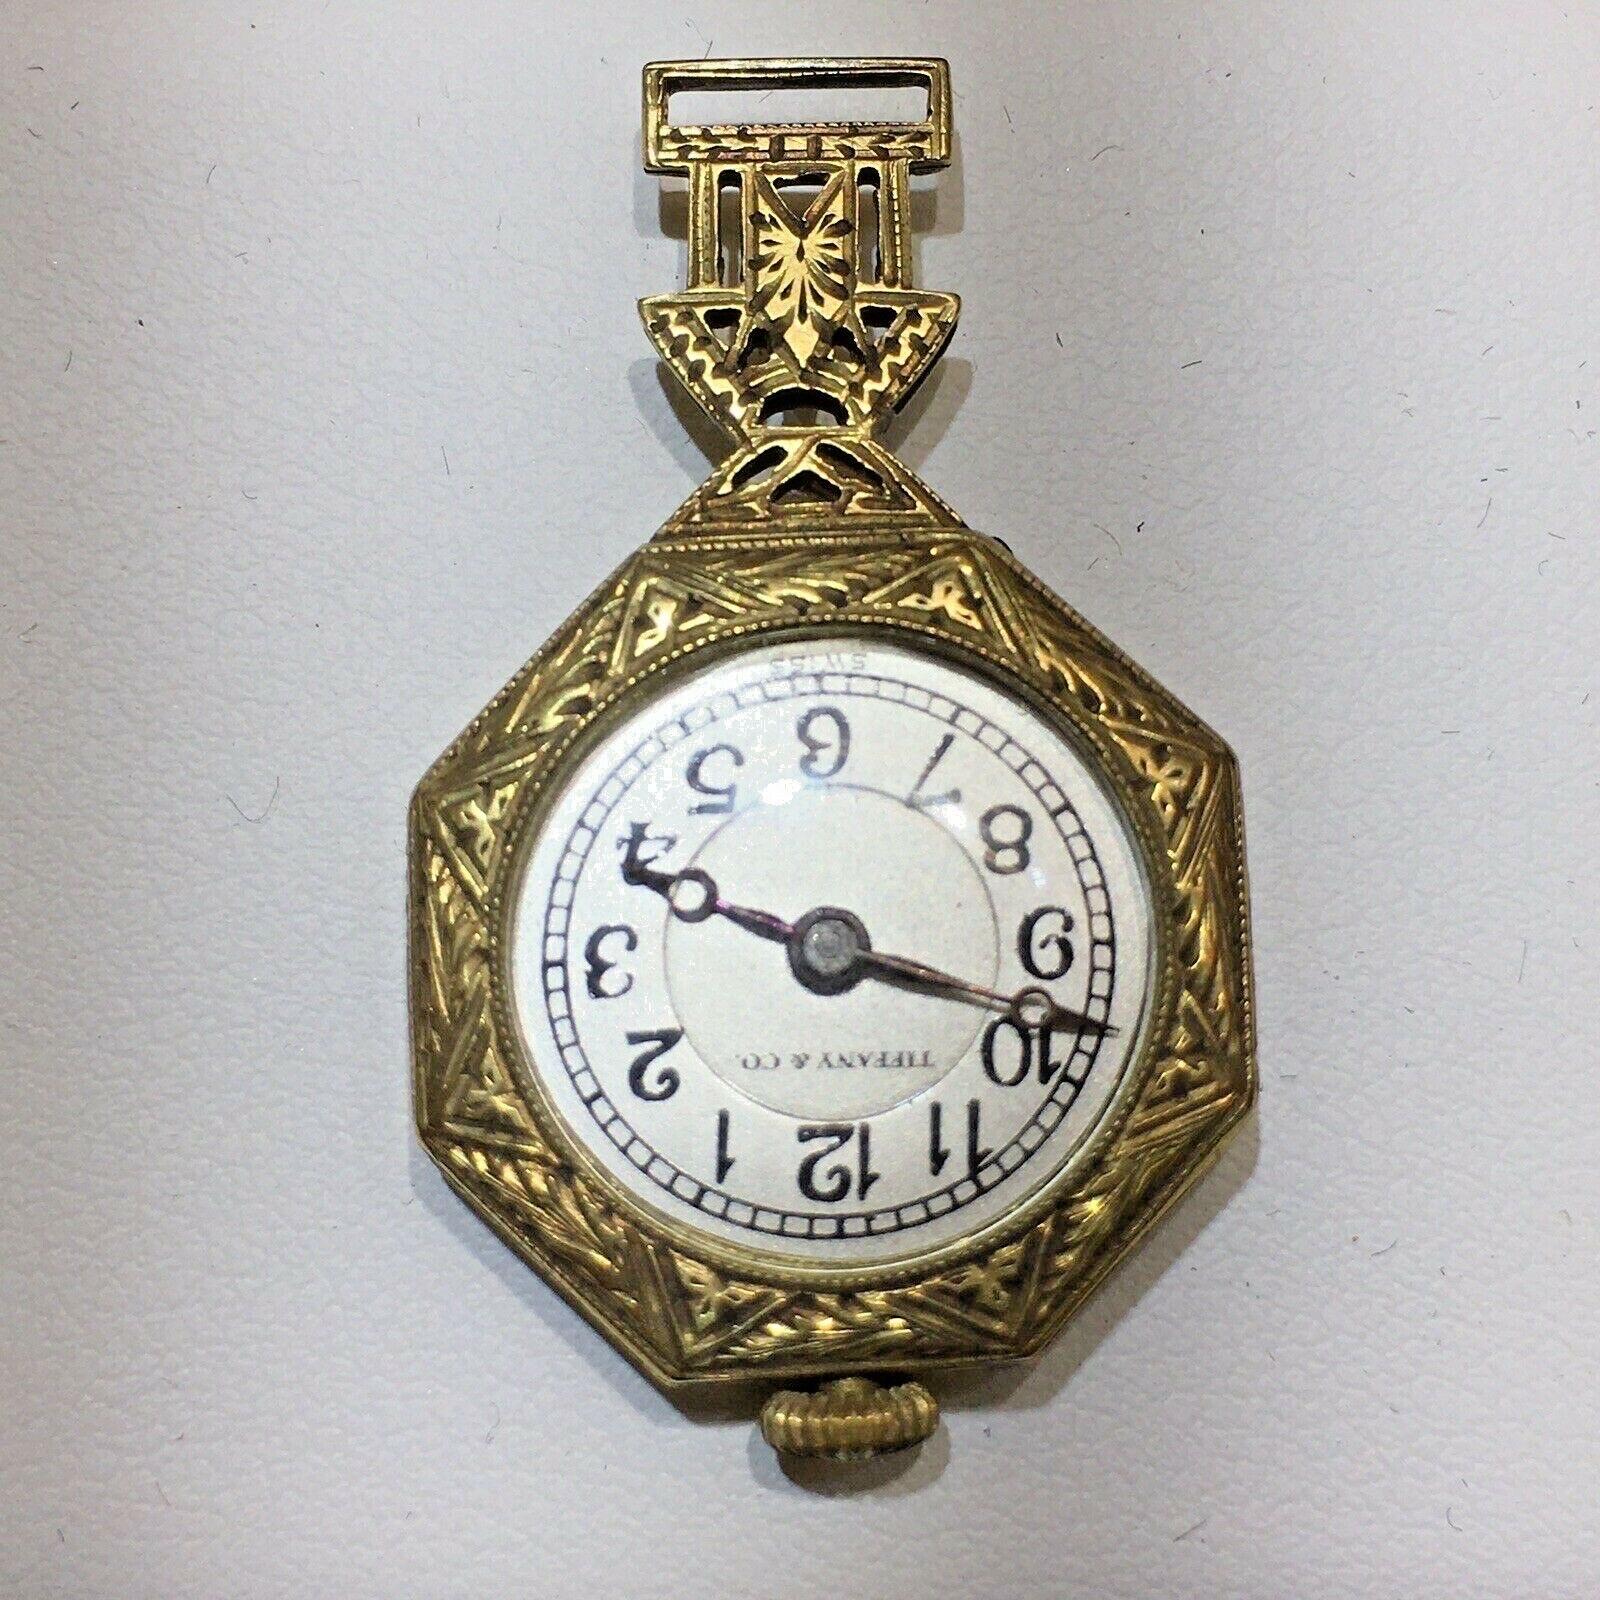 ANTIQUE Victorian Gilded Age Tiffany & Co 14 Karat Pendant Watch 1880s.

Weighing 10.3 gram

36 mm long 21 mm wide

No chain, it hangs from a ribbon, see pictures 
Seller Notes:	In good preowned condition, no damage, no dents, no evidence of repair,